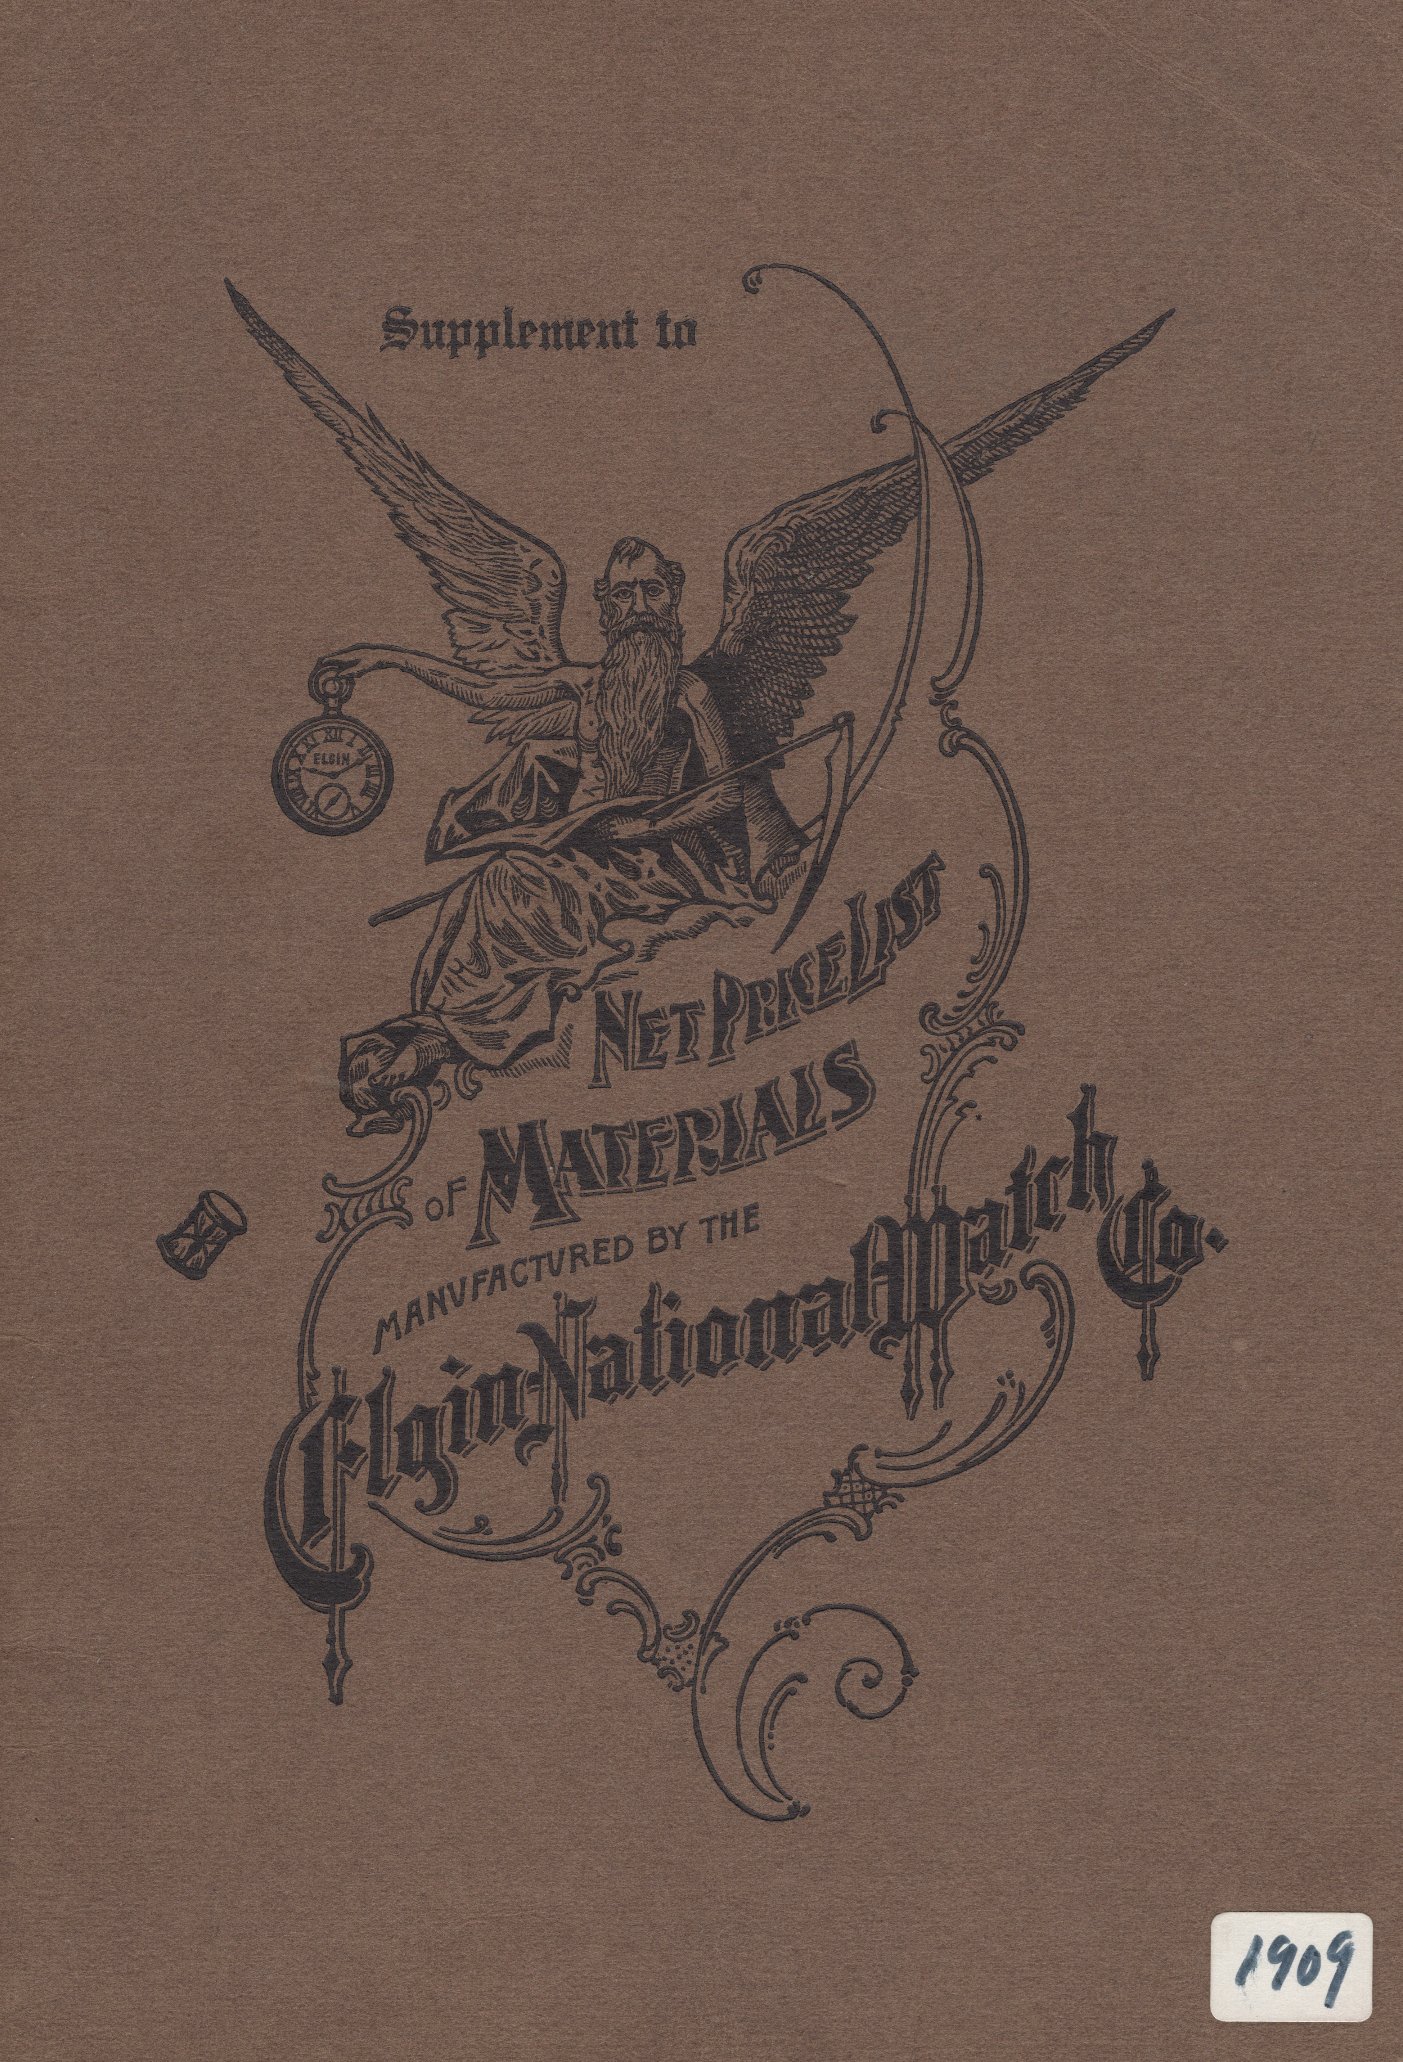 Supplement to Net Price List of Materials Manufactured by the Elgin National Watch Co. (1909) Cover Image